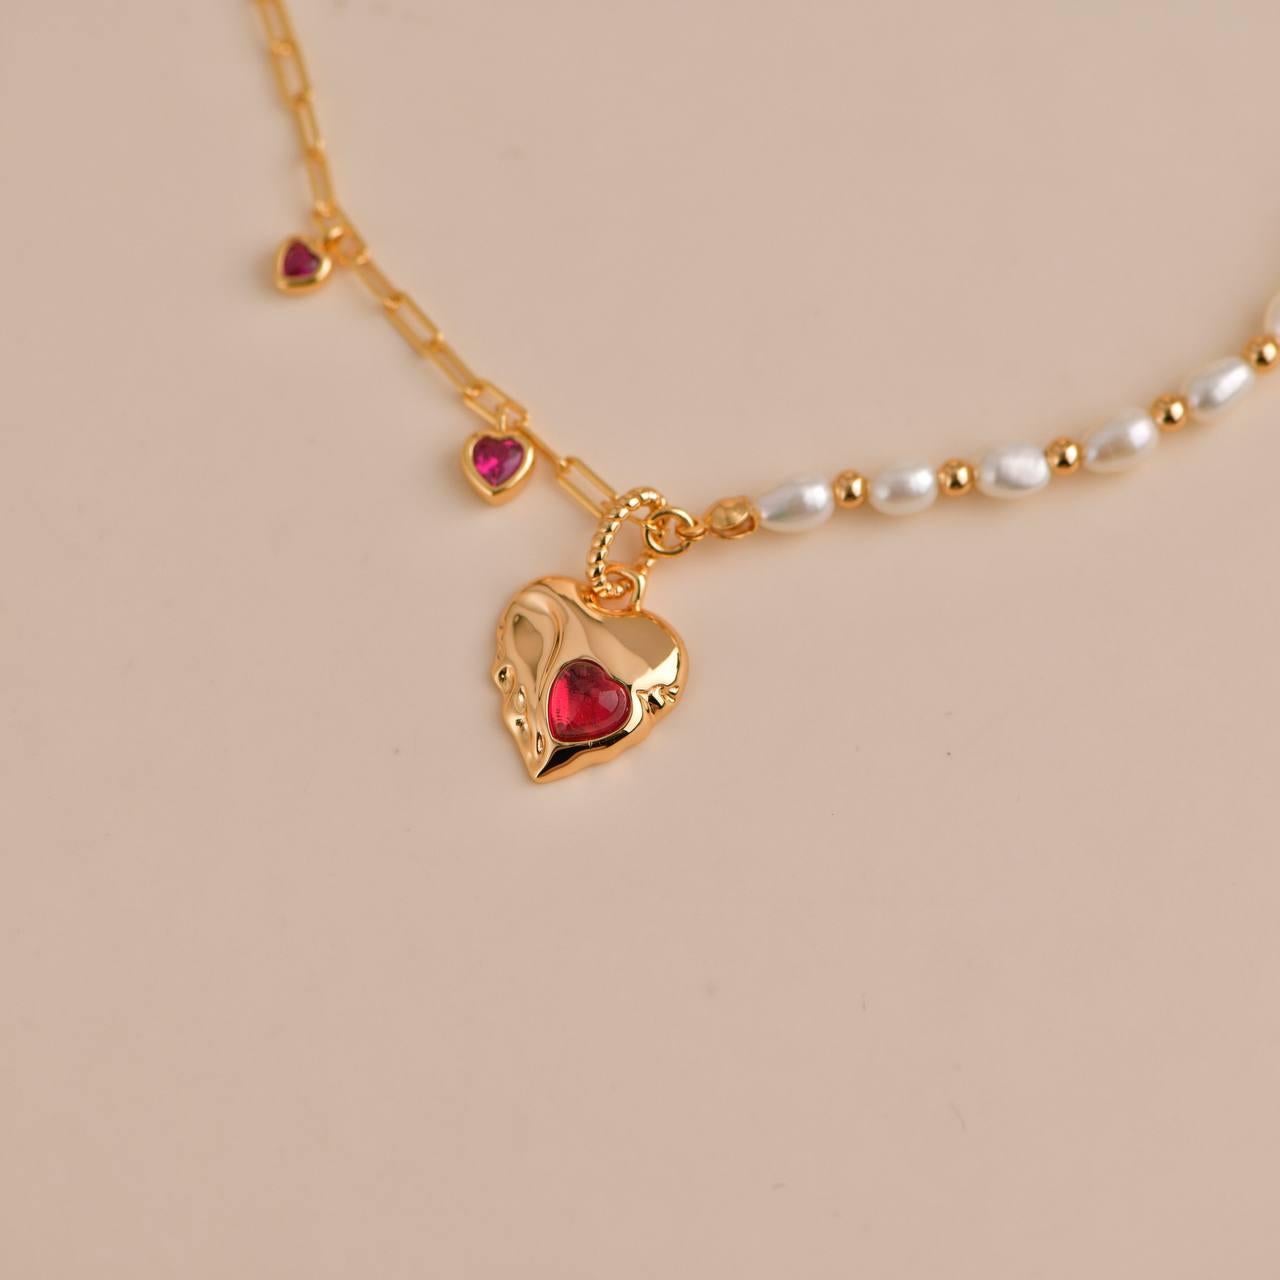 SKU: FT-0012
Material: 18K Gold-Plated / Natural Freshwater Pearls/Zircon
Length: Approx. 40cm + 6cm Extension Chain
